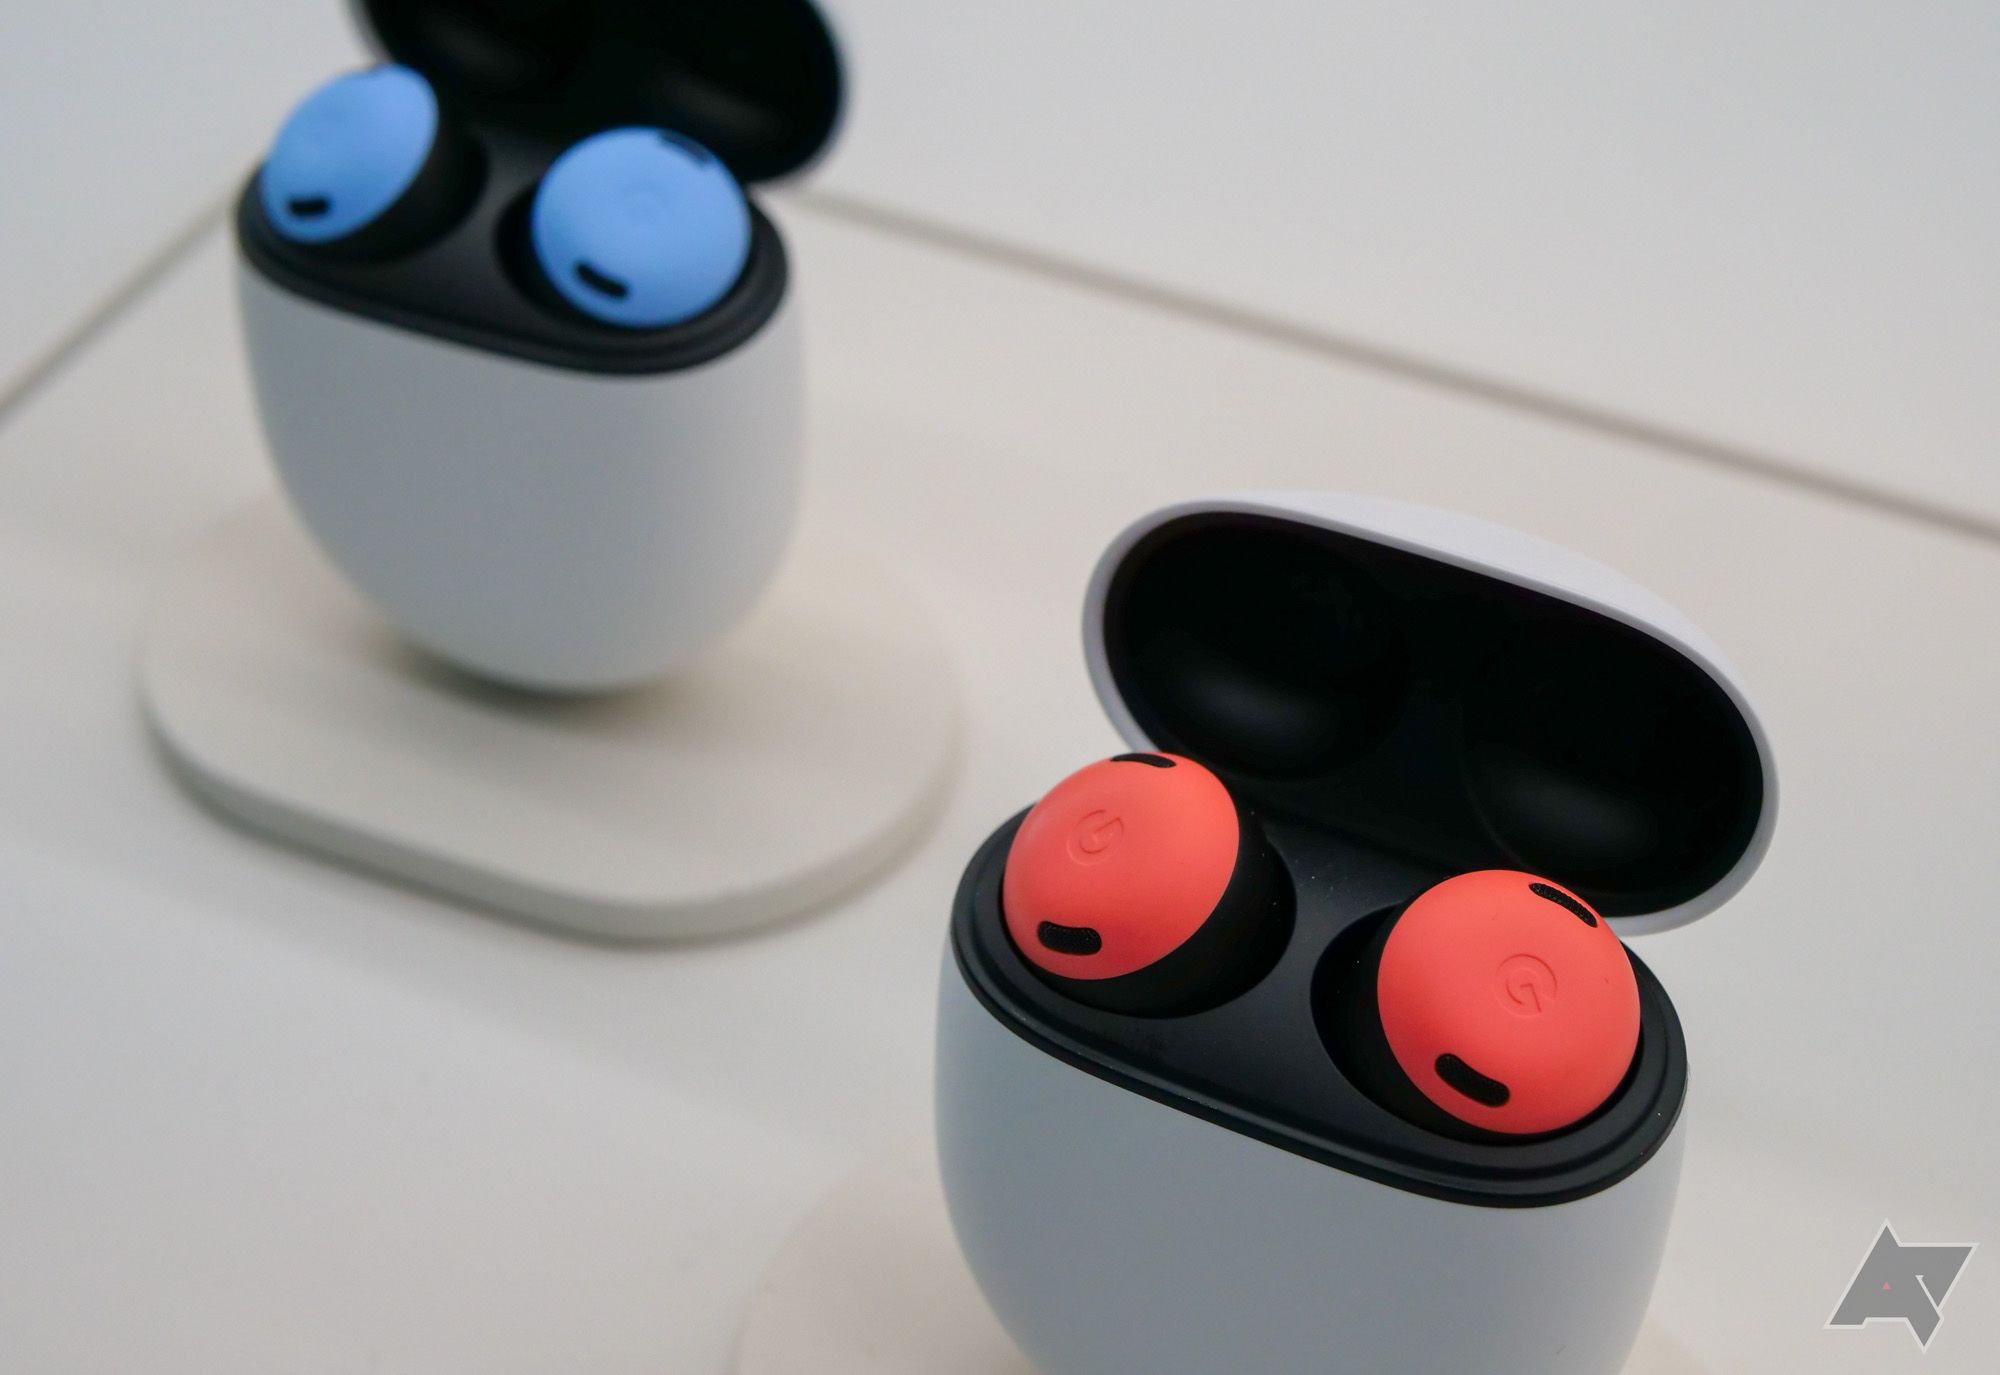 Google Pixel Buds Pro in different colors